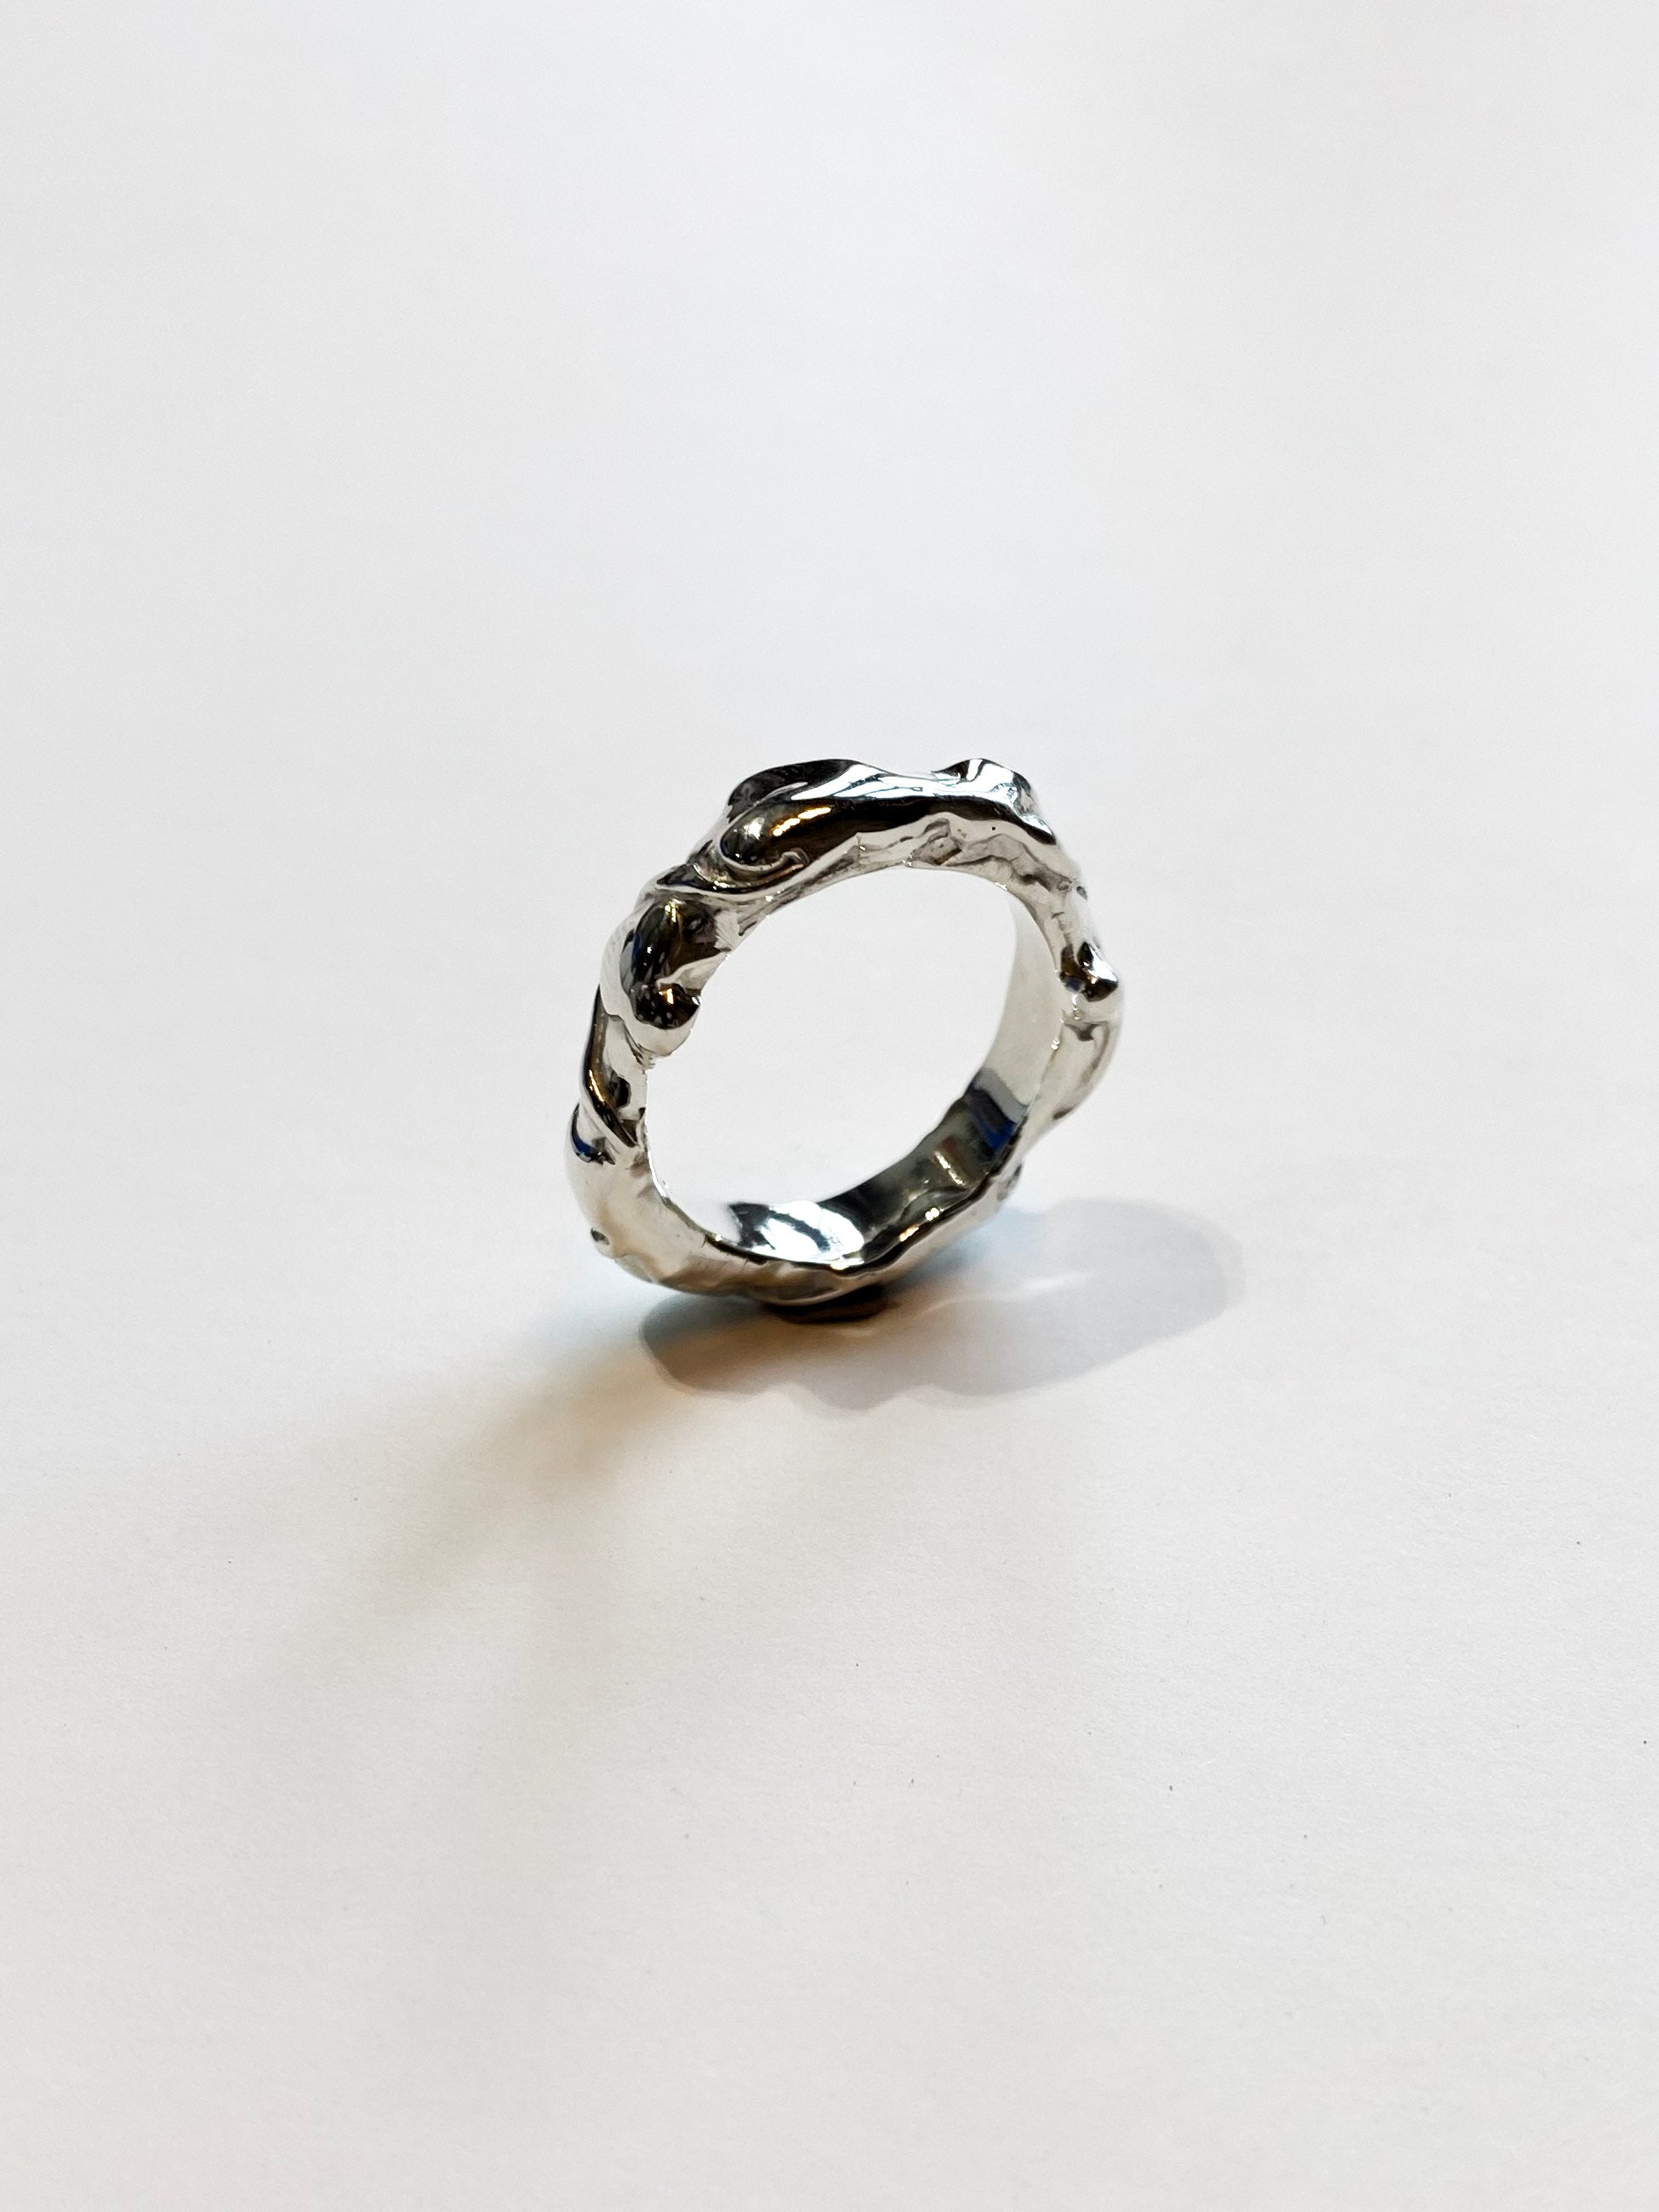 Silver abstract and textured ring on white background